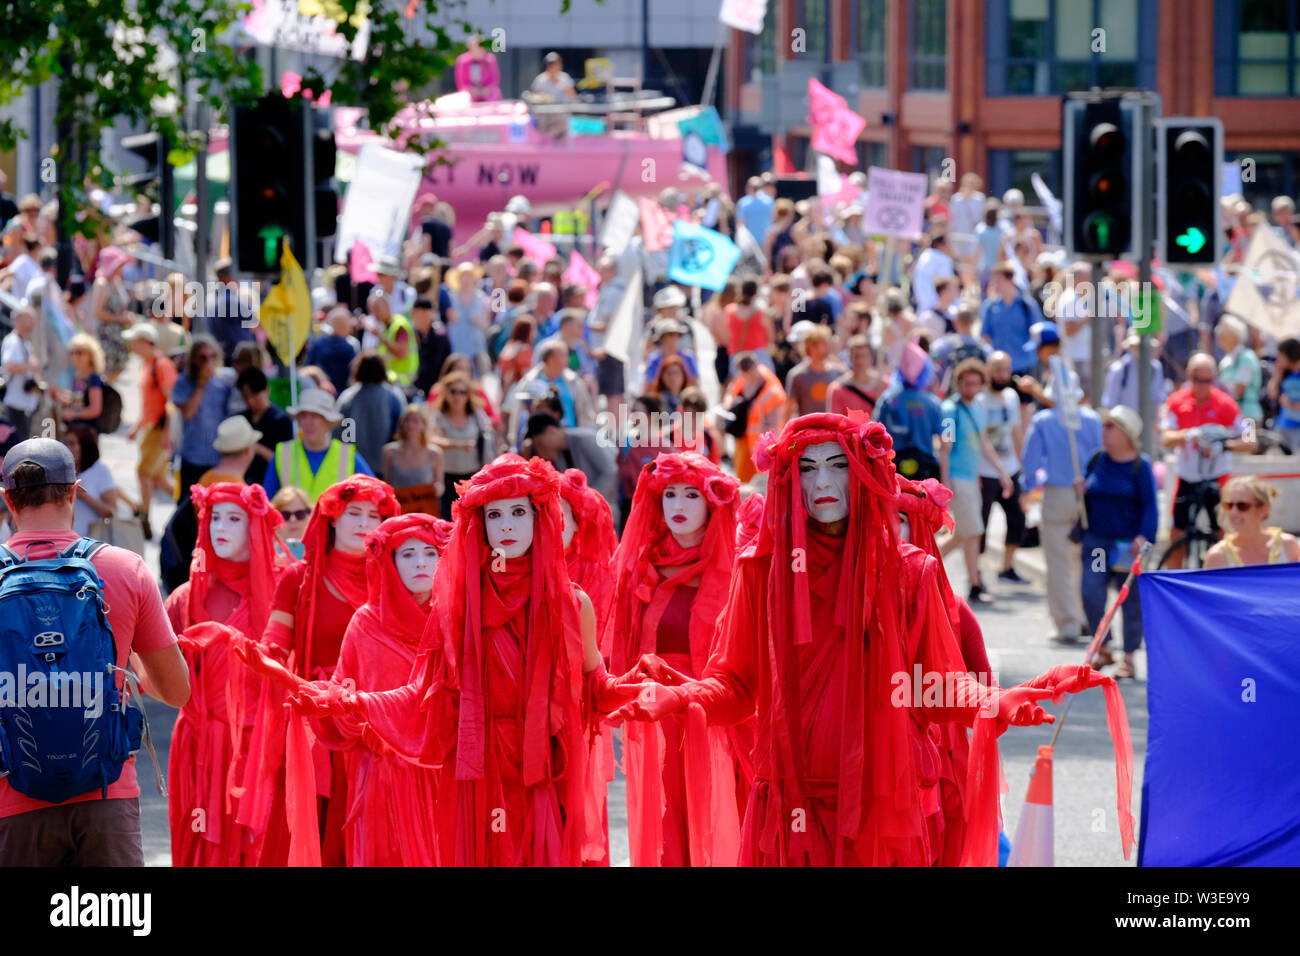 Bristol, UK, 15th July 2019.  The Red Brigade. As part of the Extinction rebellion movement summer uprising a group have occupied Bristol Bridge in the center of the city. The protest is to raise awareness of the speed of climate change and the lack of action to stop it. The protestors have worked with local agencies to ensure a safe and peaceful protest, police are present and diversions in place. Further occupations are planned throughout the city this week. Pictured are the red brigade group Stock Photo